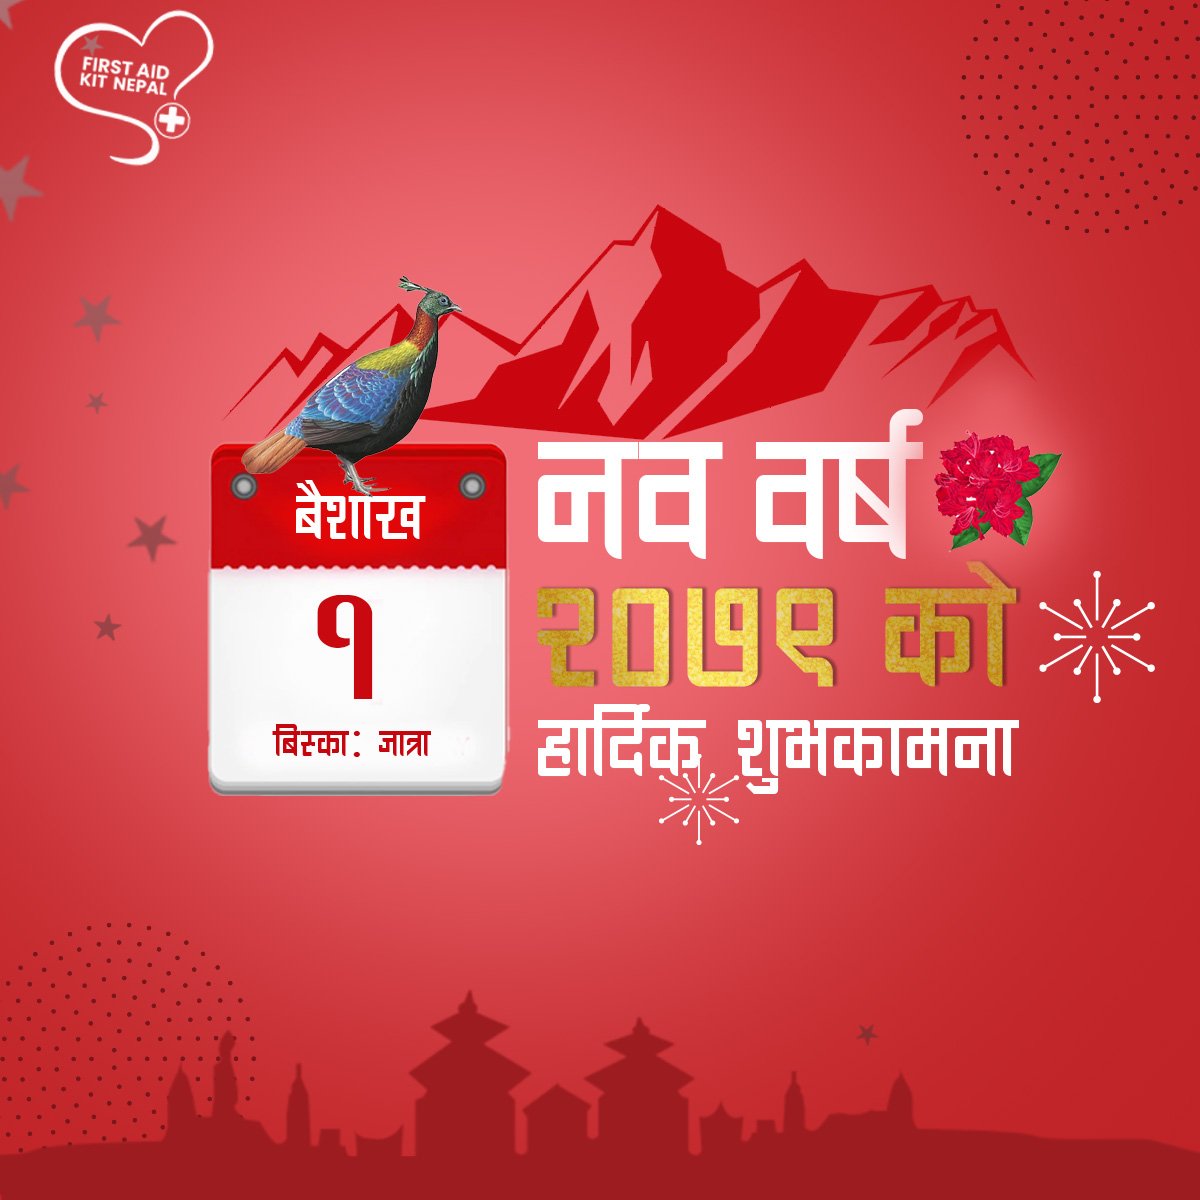 Happy New Year 2079.
Our First Aid Kit Nepal family wishes you Naya barsa ko shubhakama to all our Nepali family and friends.🥳🎉
#Happynewyear 
#happynewyear2079🎉🎊🎇🕉️
#firstaidkitnepal
#firstaidsupplier 
#firstaidtraining 
#fristaidtrainingcourse2 
#firstaidhome